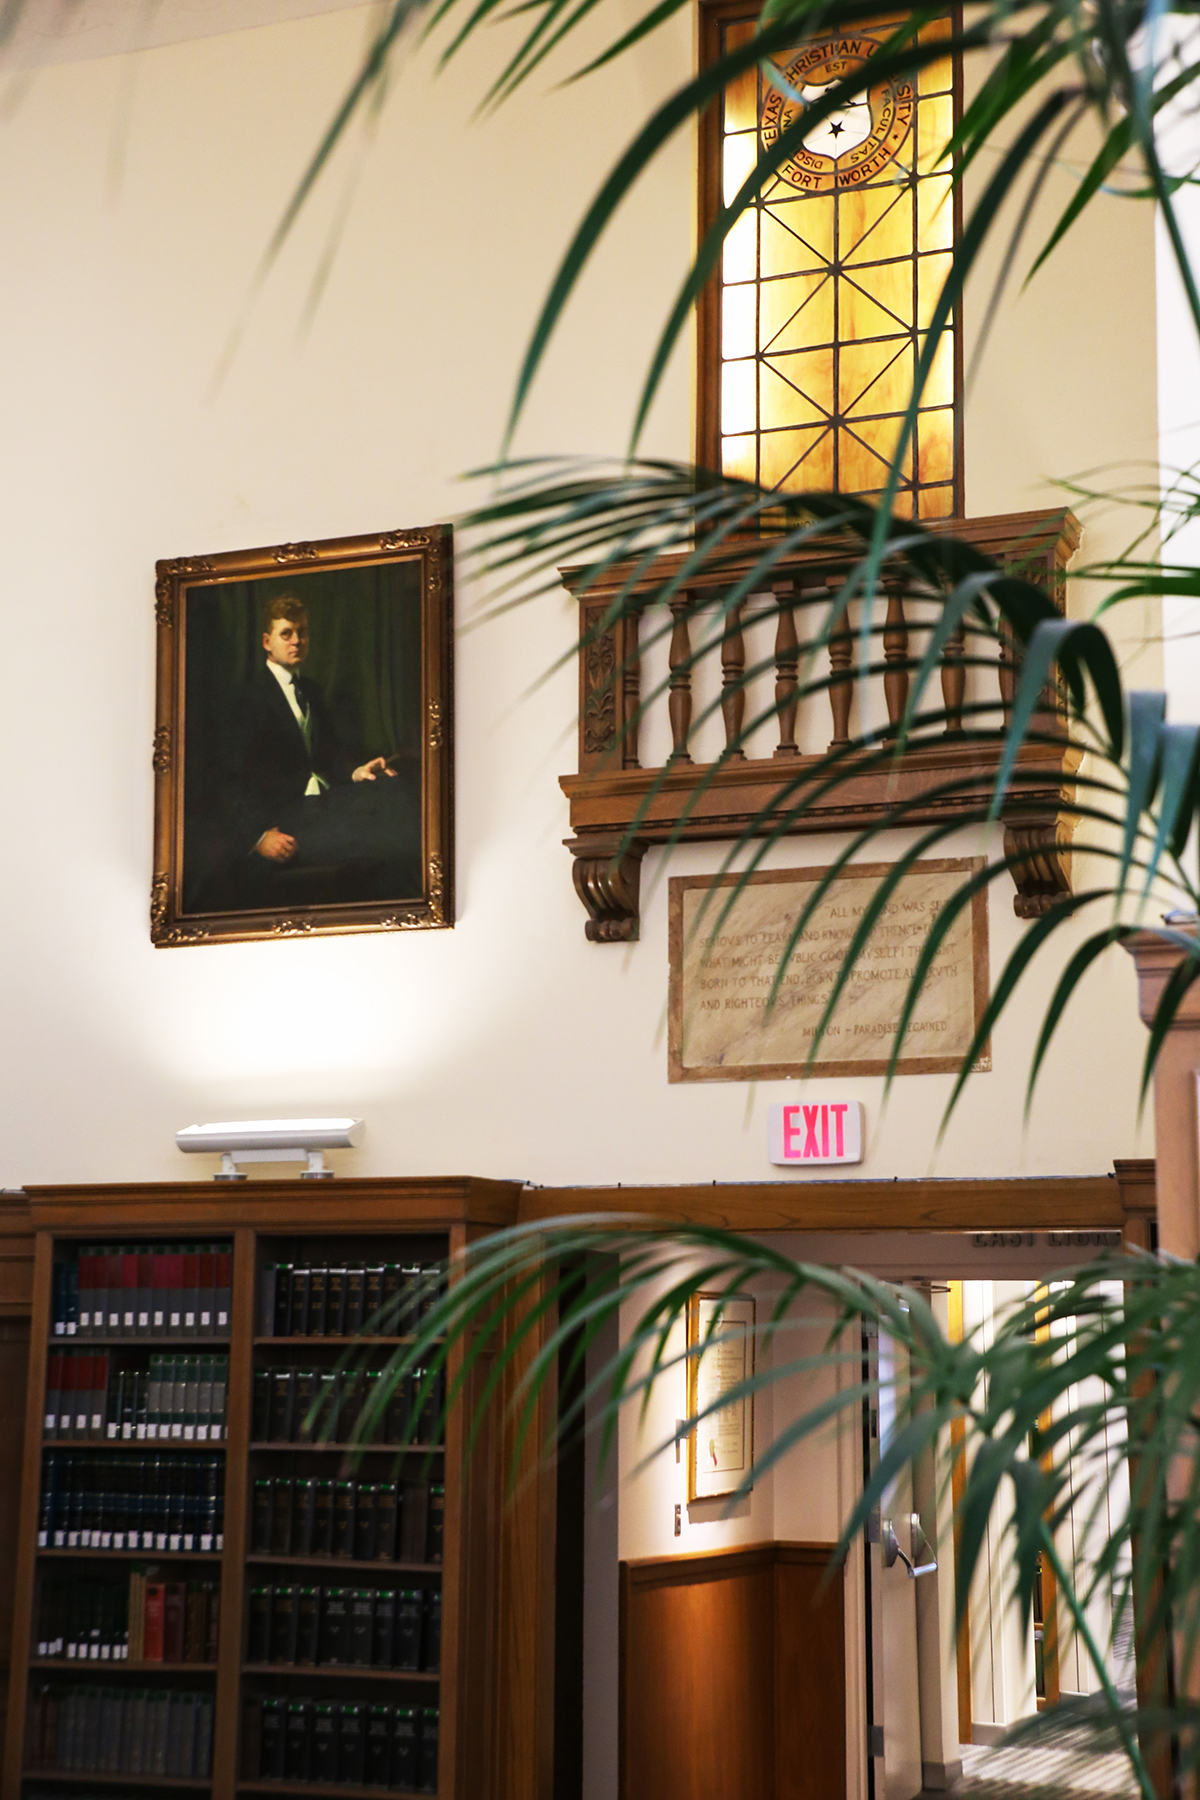 The painting hangs to the left of the Juliette balcony and stained glass window that are original to the library. Photo By Amy Peterson